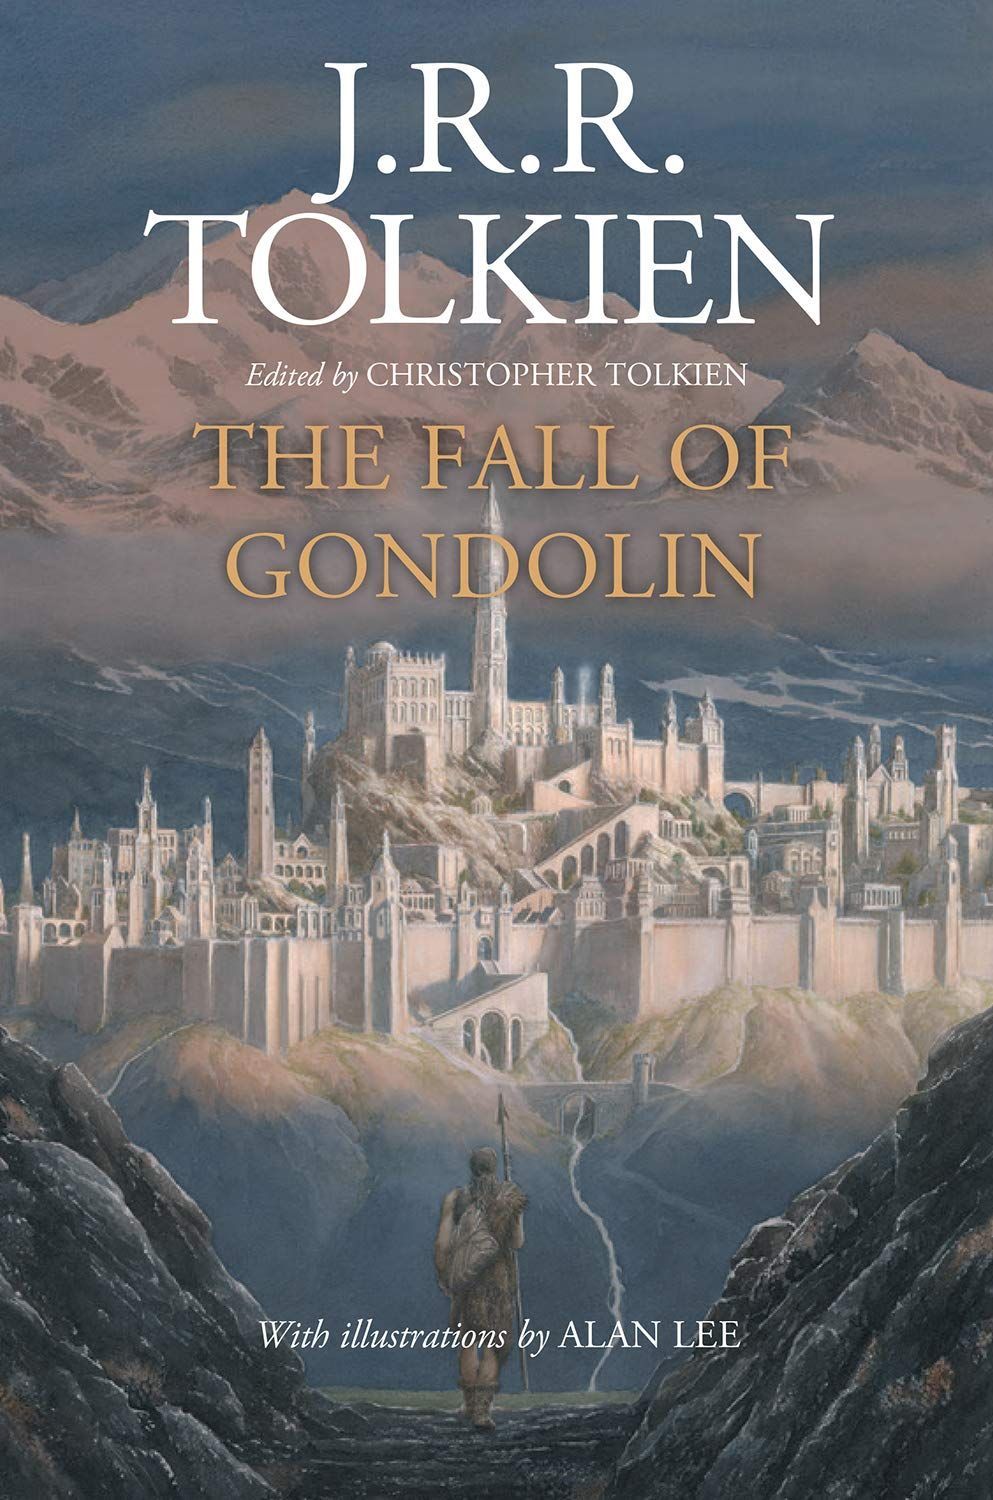 The Final Treasure from the Tolkien Hoard